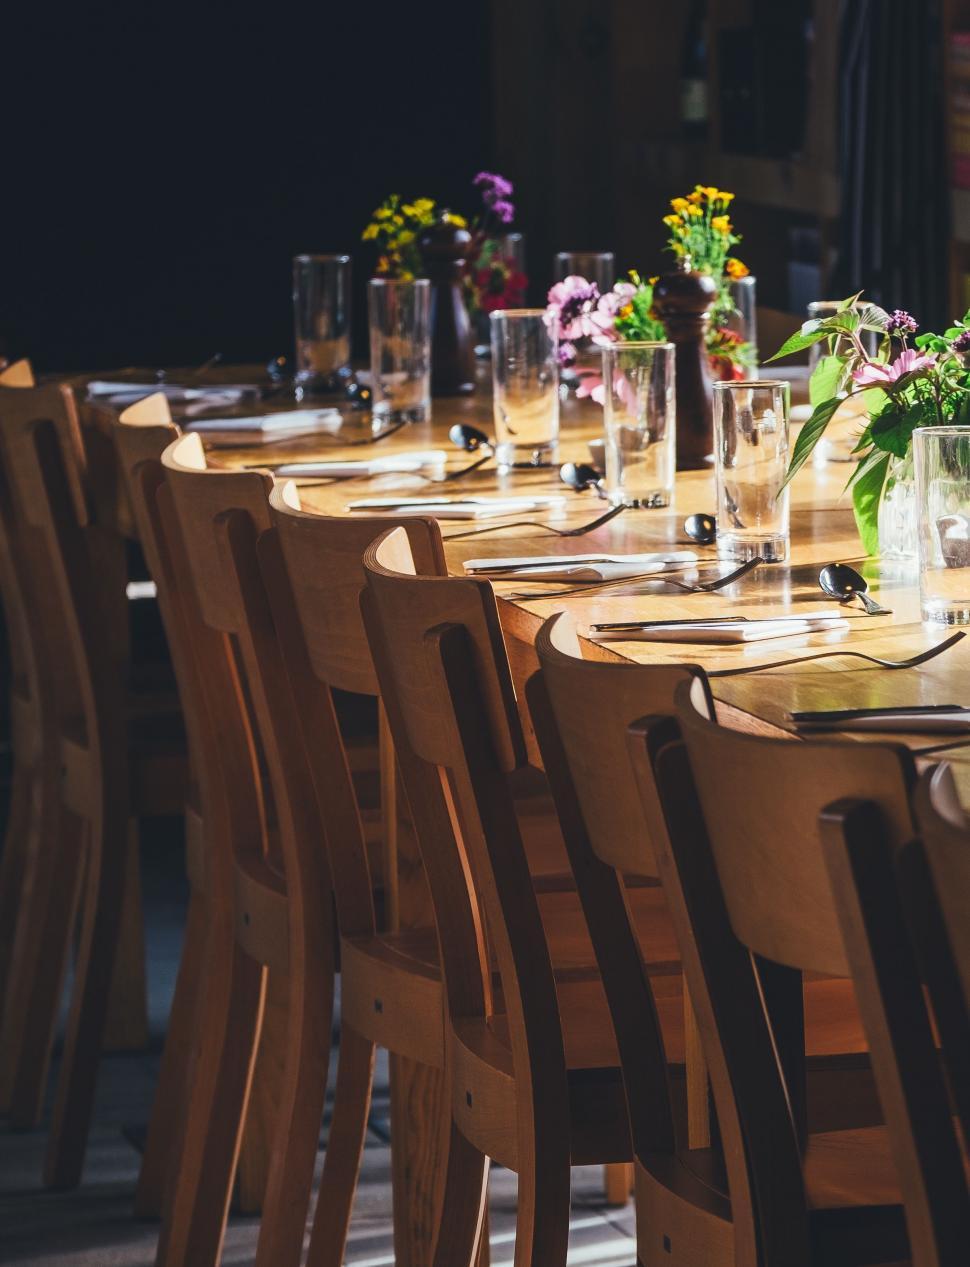 Free Image of Long Table With Vase of Flowers 